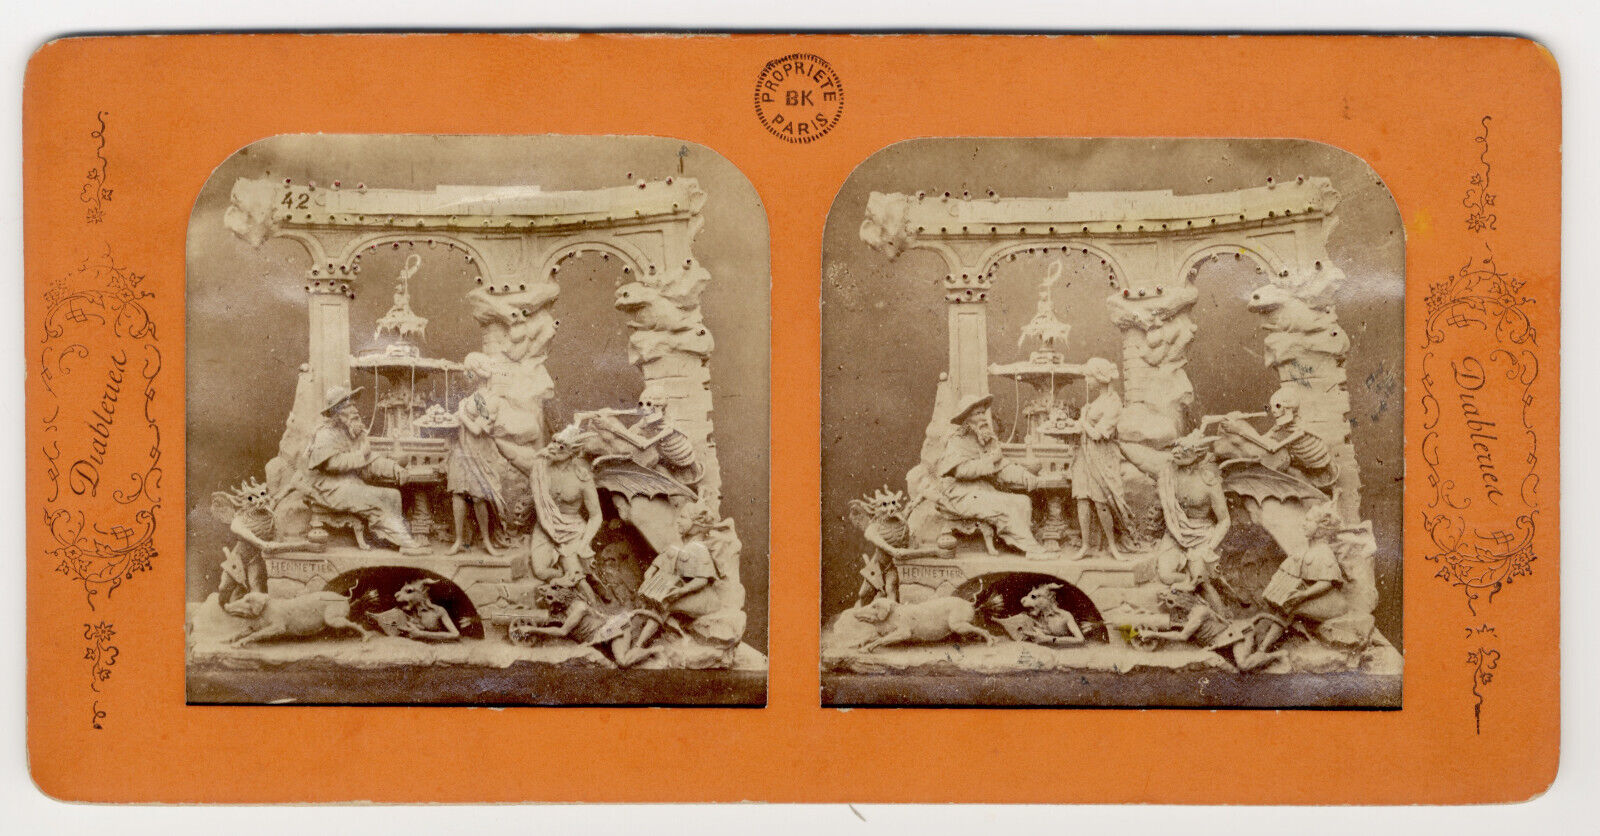 Diablerie Skeletons Devils Early French Tissue Stereo View c 1870 untitled